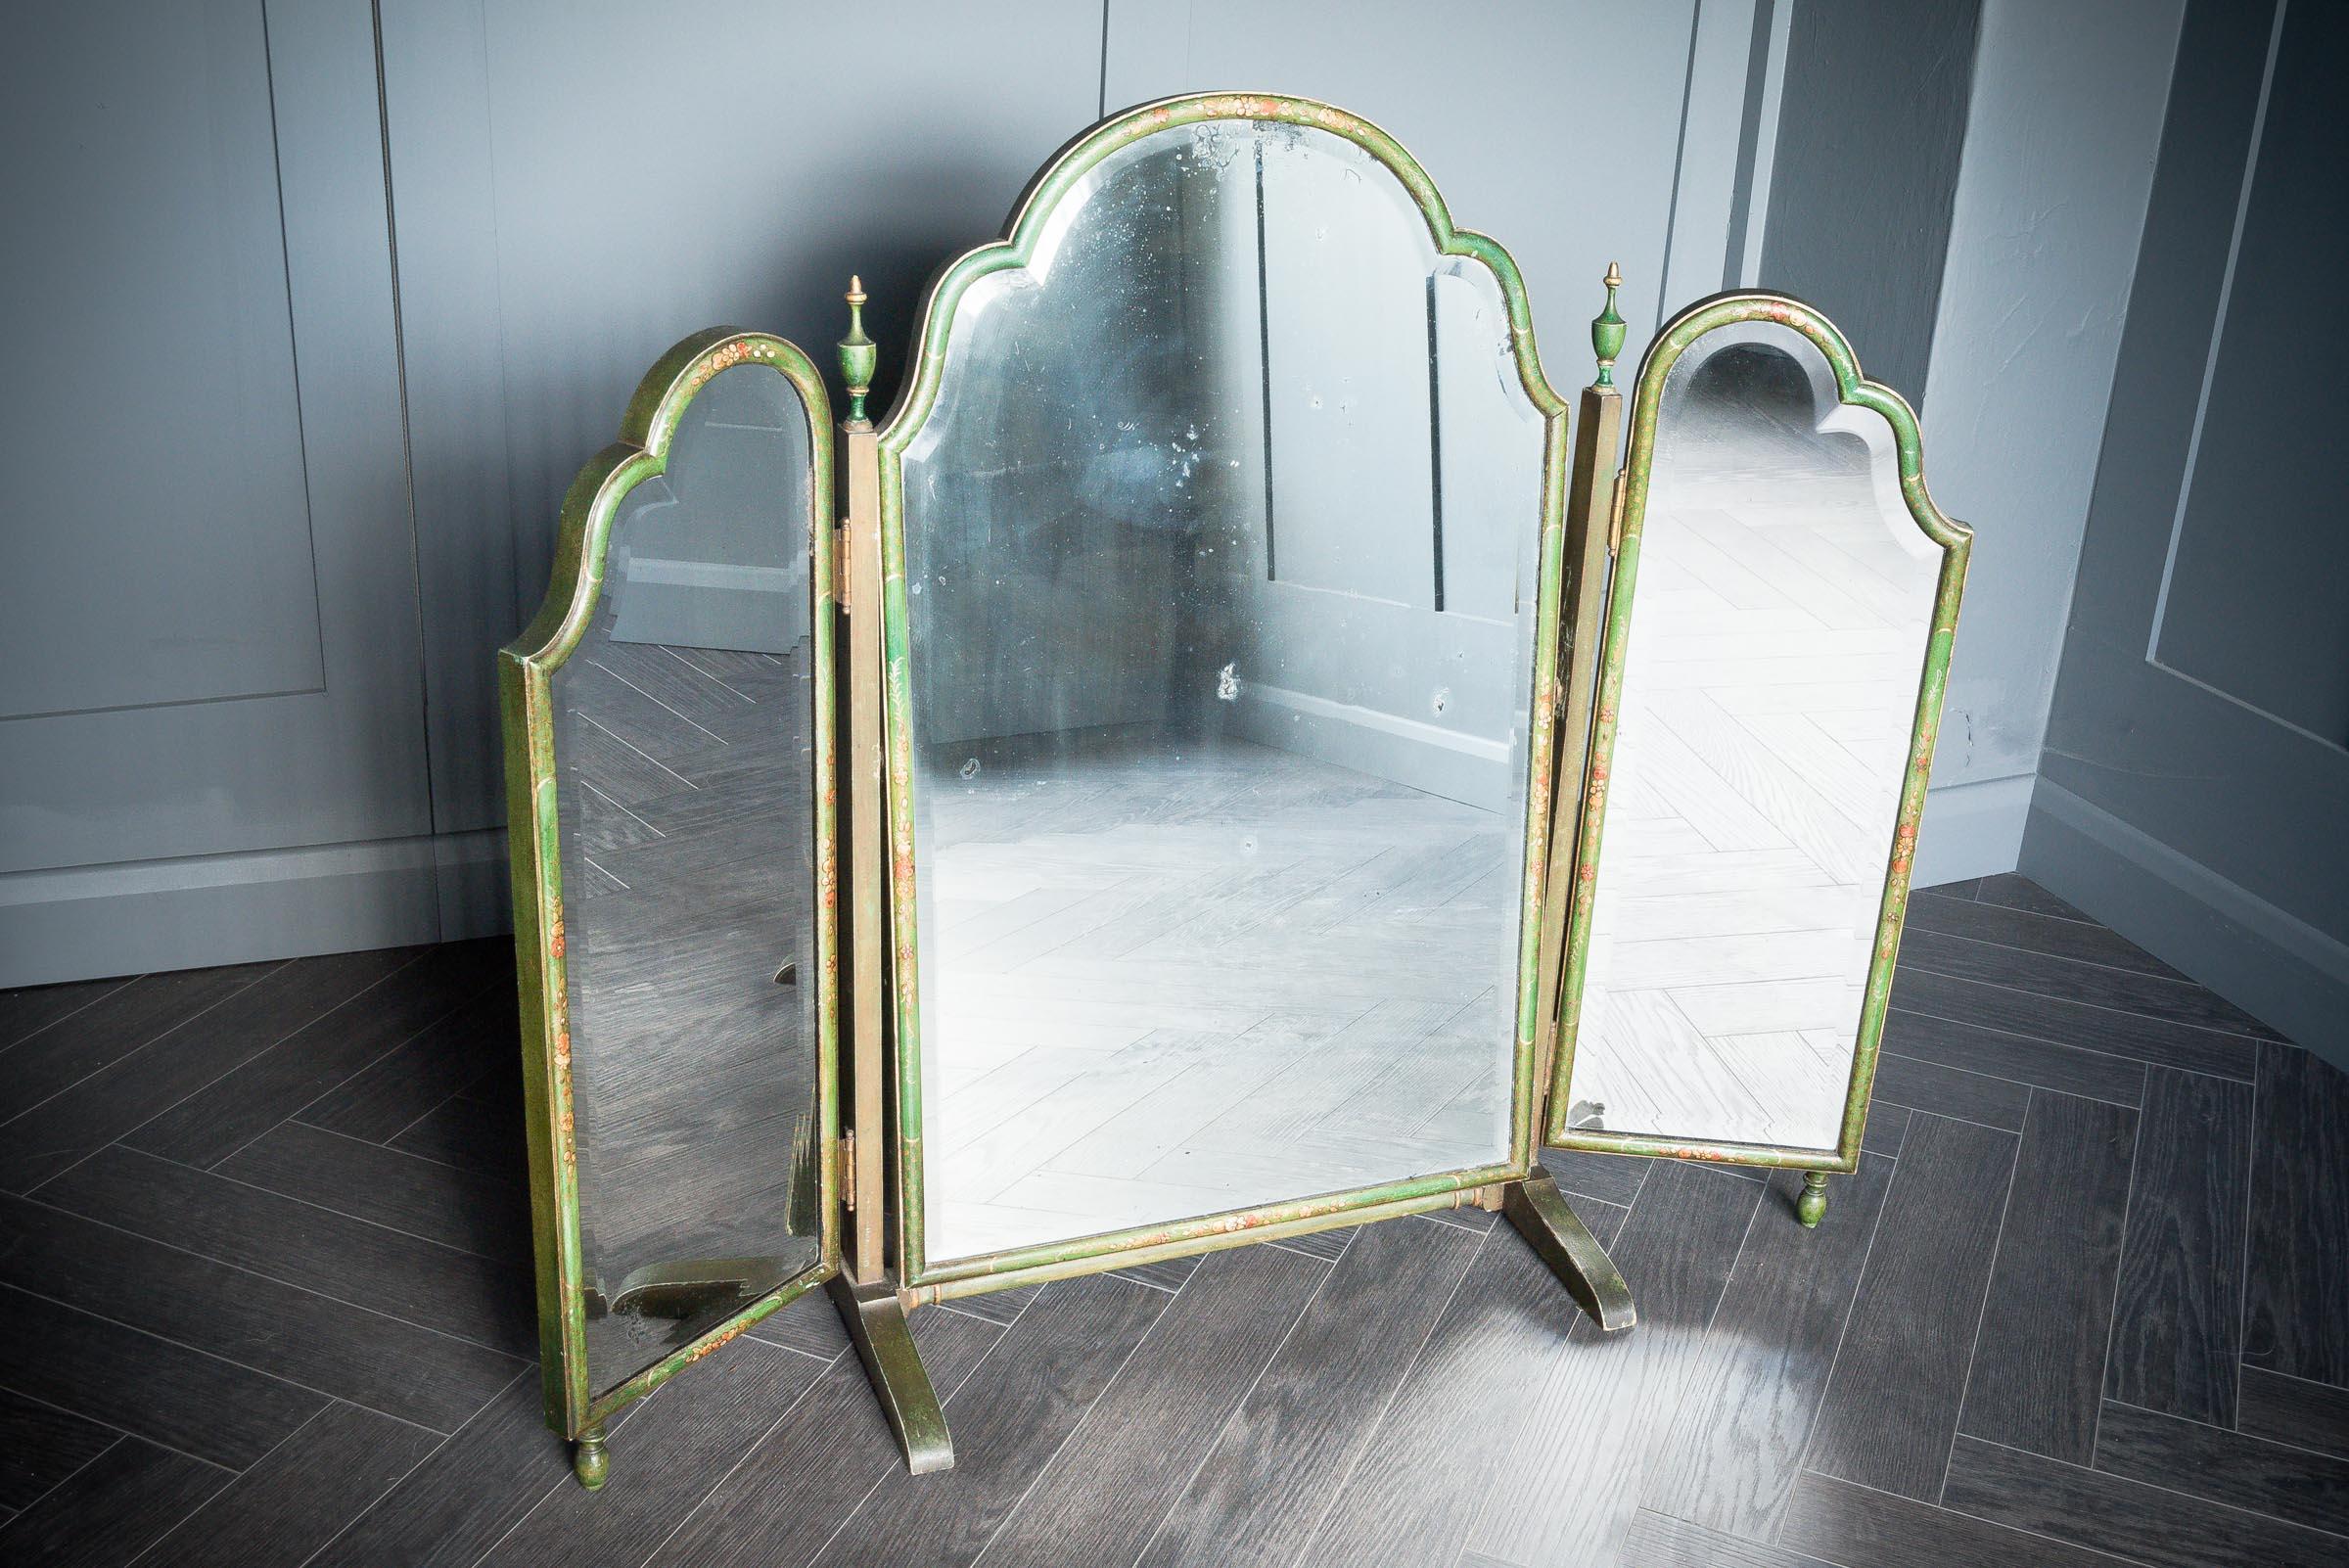 This stunning vanity mirror is charmingly washed in green paint showing different tones and depths throughout the paintwork. The floral design is hand painted over the top. This piece is completed by three individual mirror parts all connected by